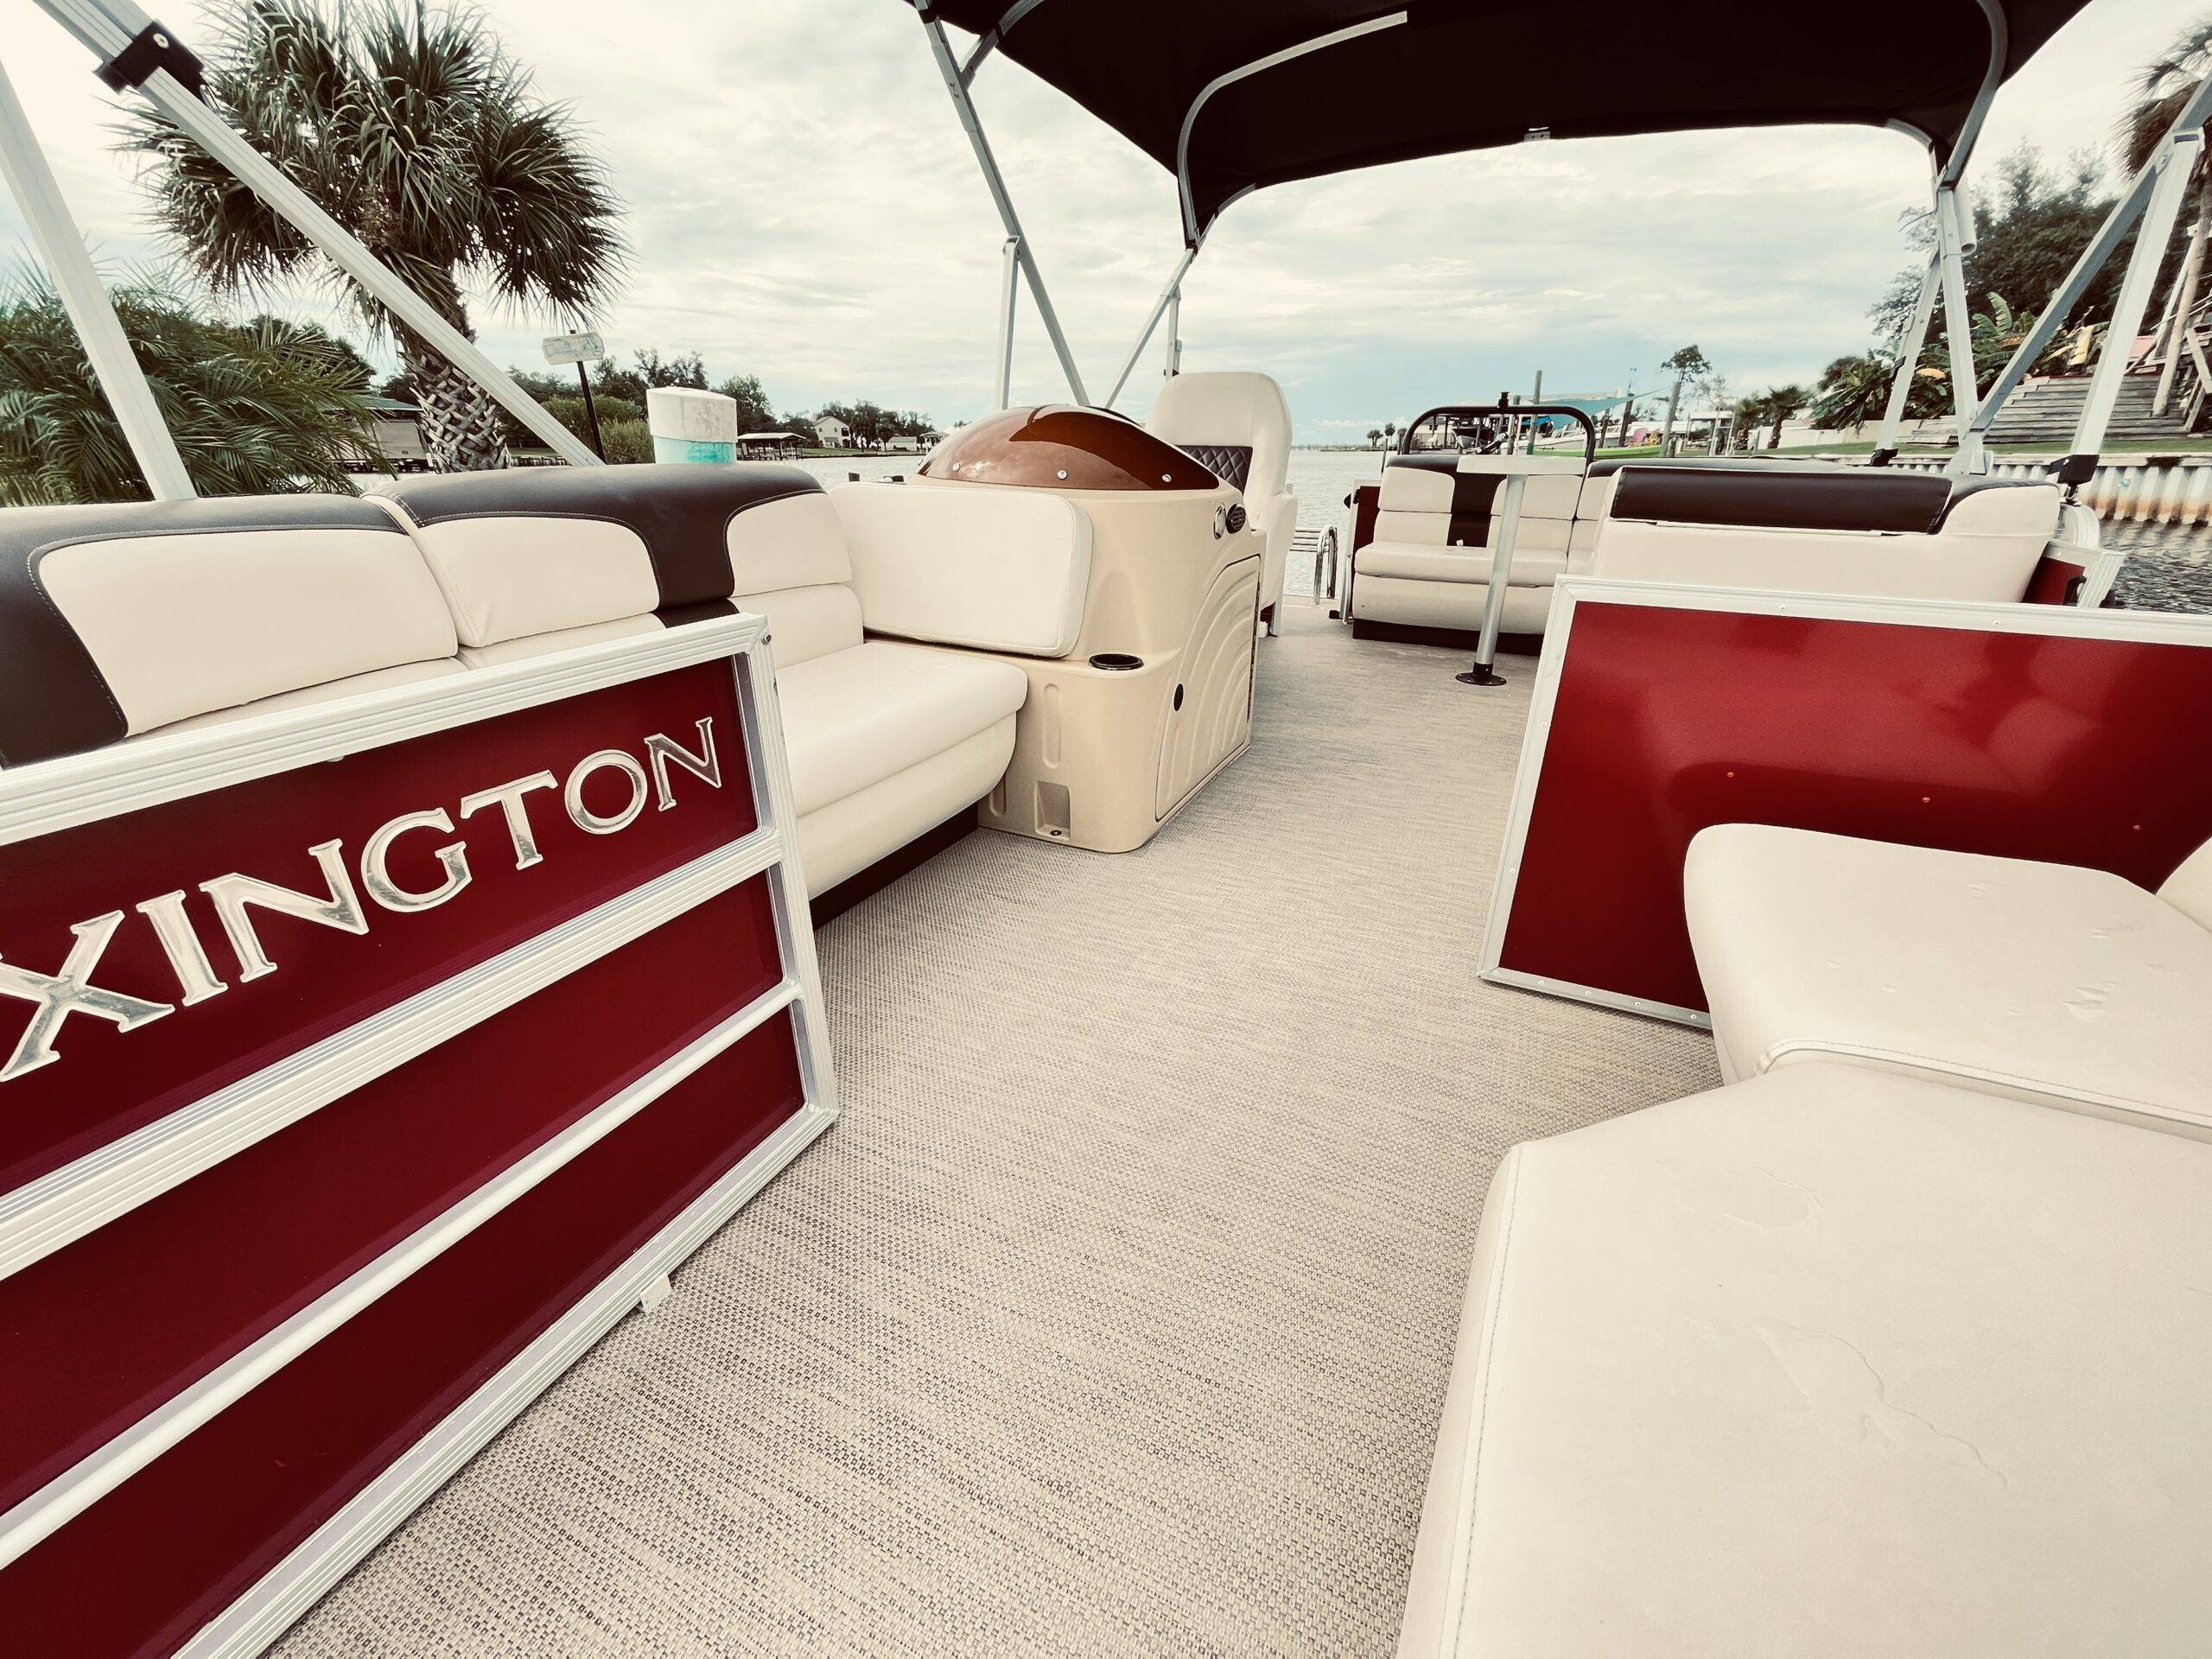 Inviting interior of the "Lexington" pontoon, perfect for a leisurely picnic on the water.